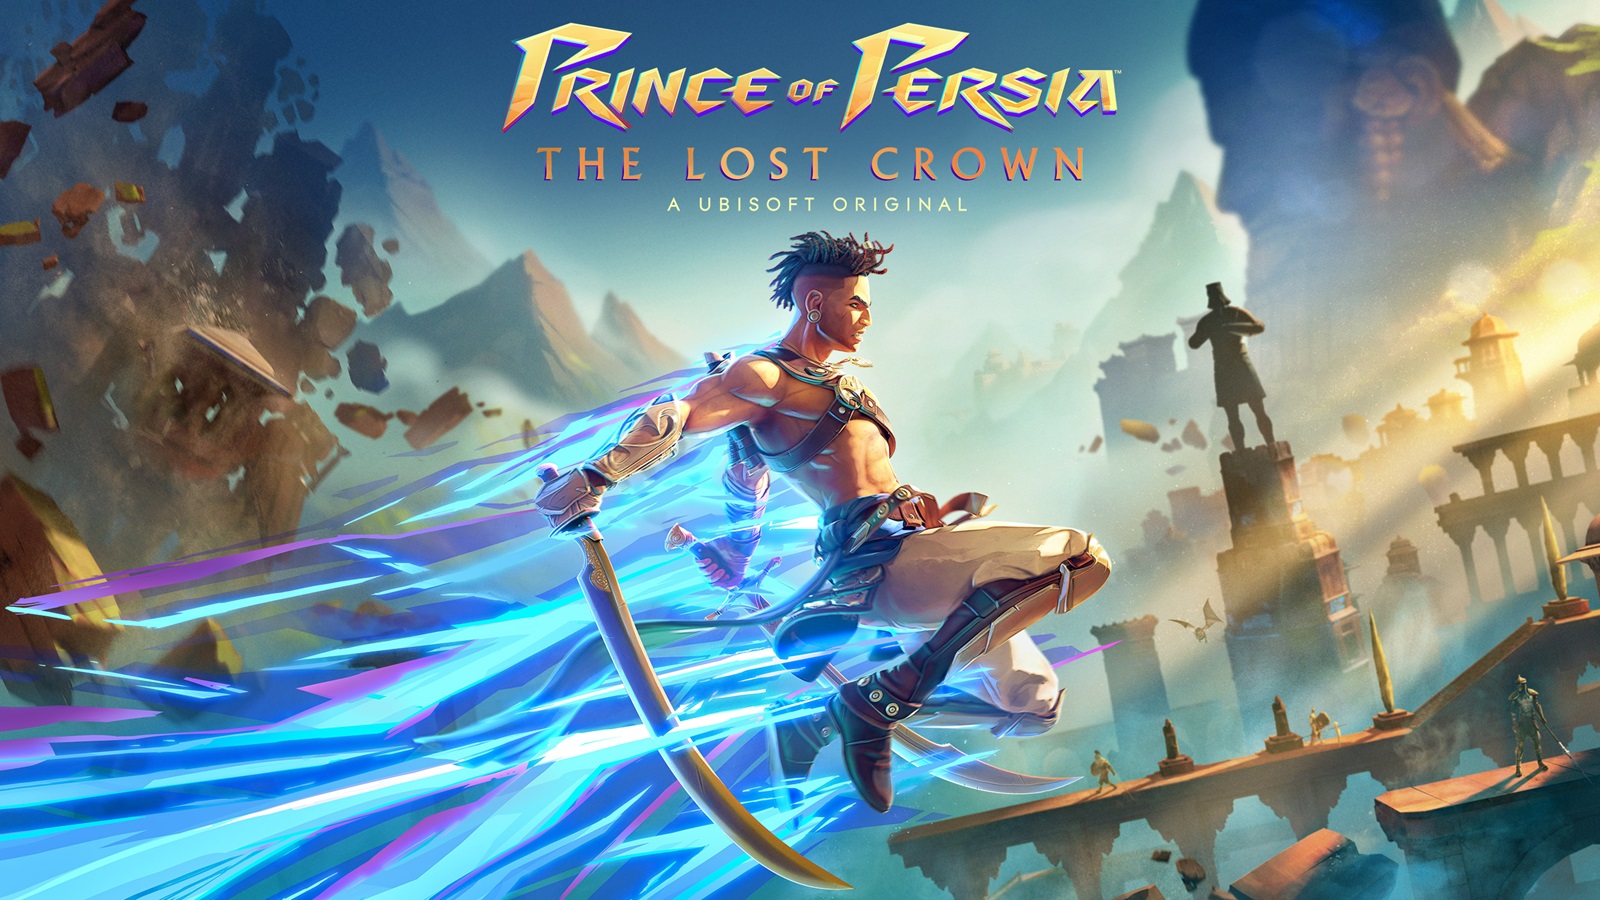 Prince of Persia: The Lost Crown is shockingly easy to run on PC